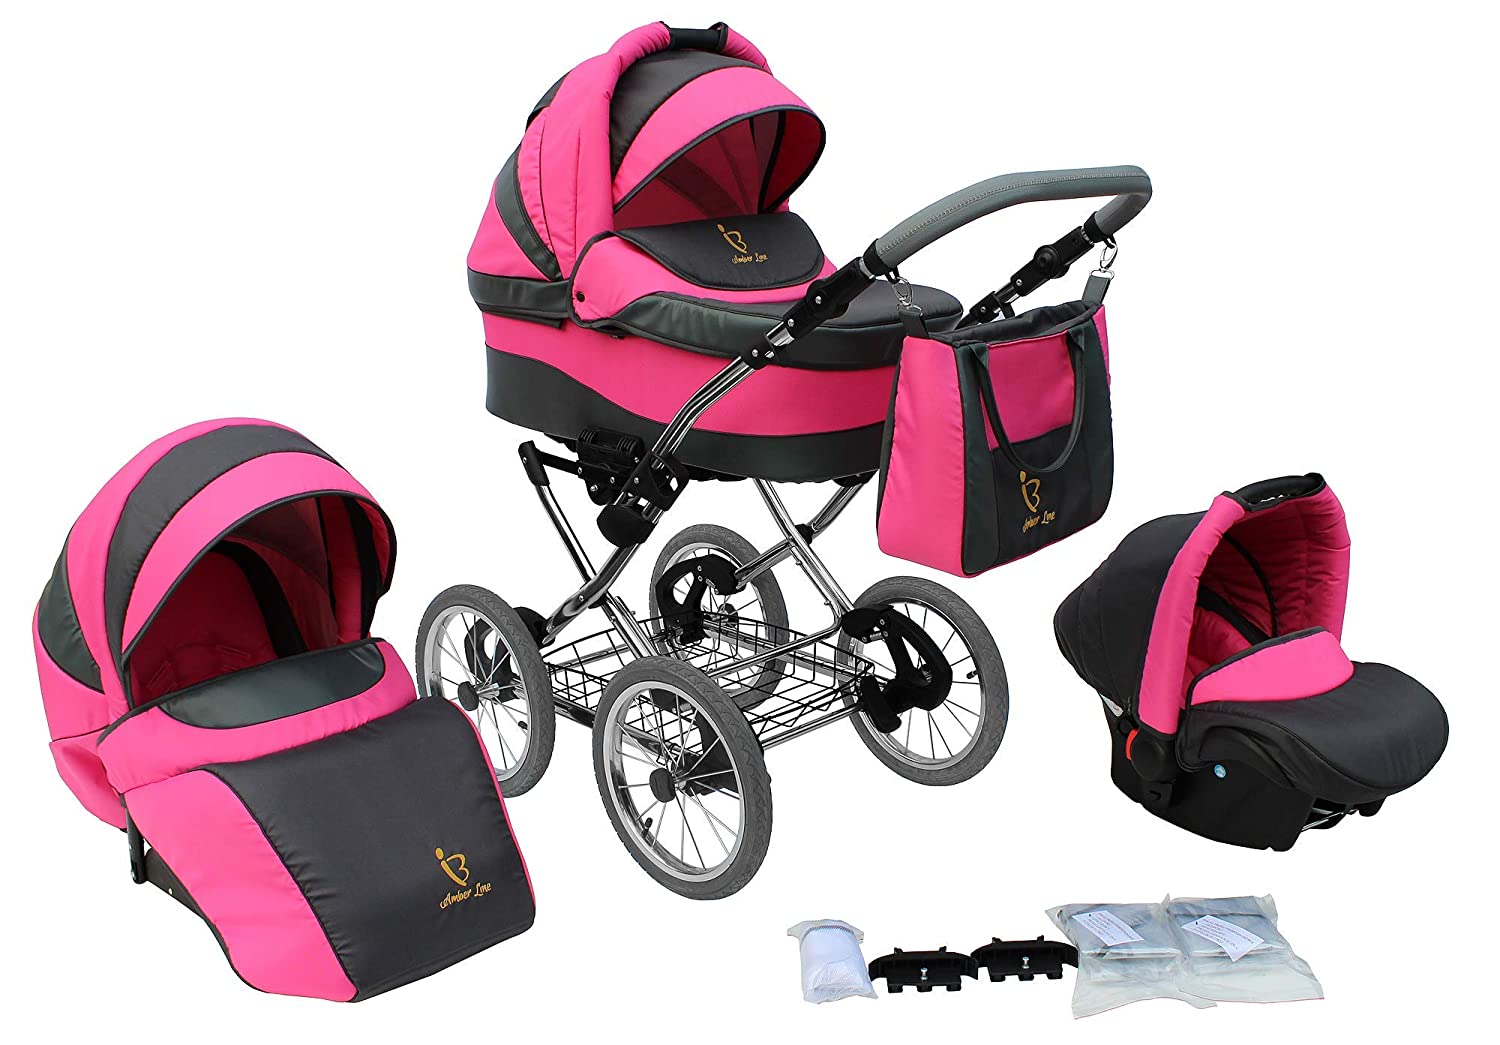 SKYLINE Classic Retro Style Combination Pram Buggy 3-in-1 Travel System Car Seat (Isofix) (Pink/14 Inch Air Tyres)